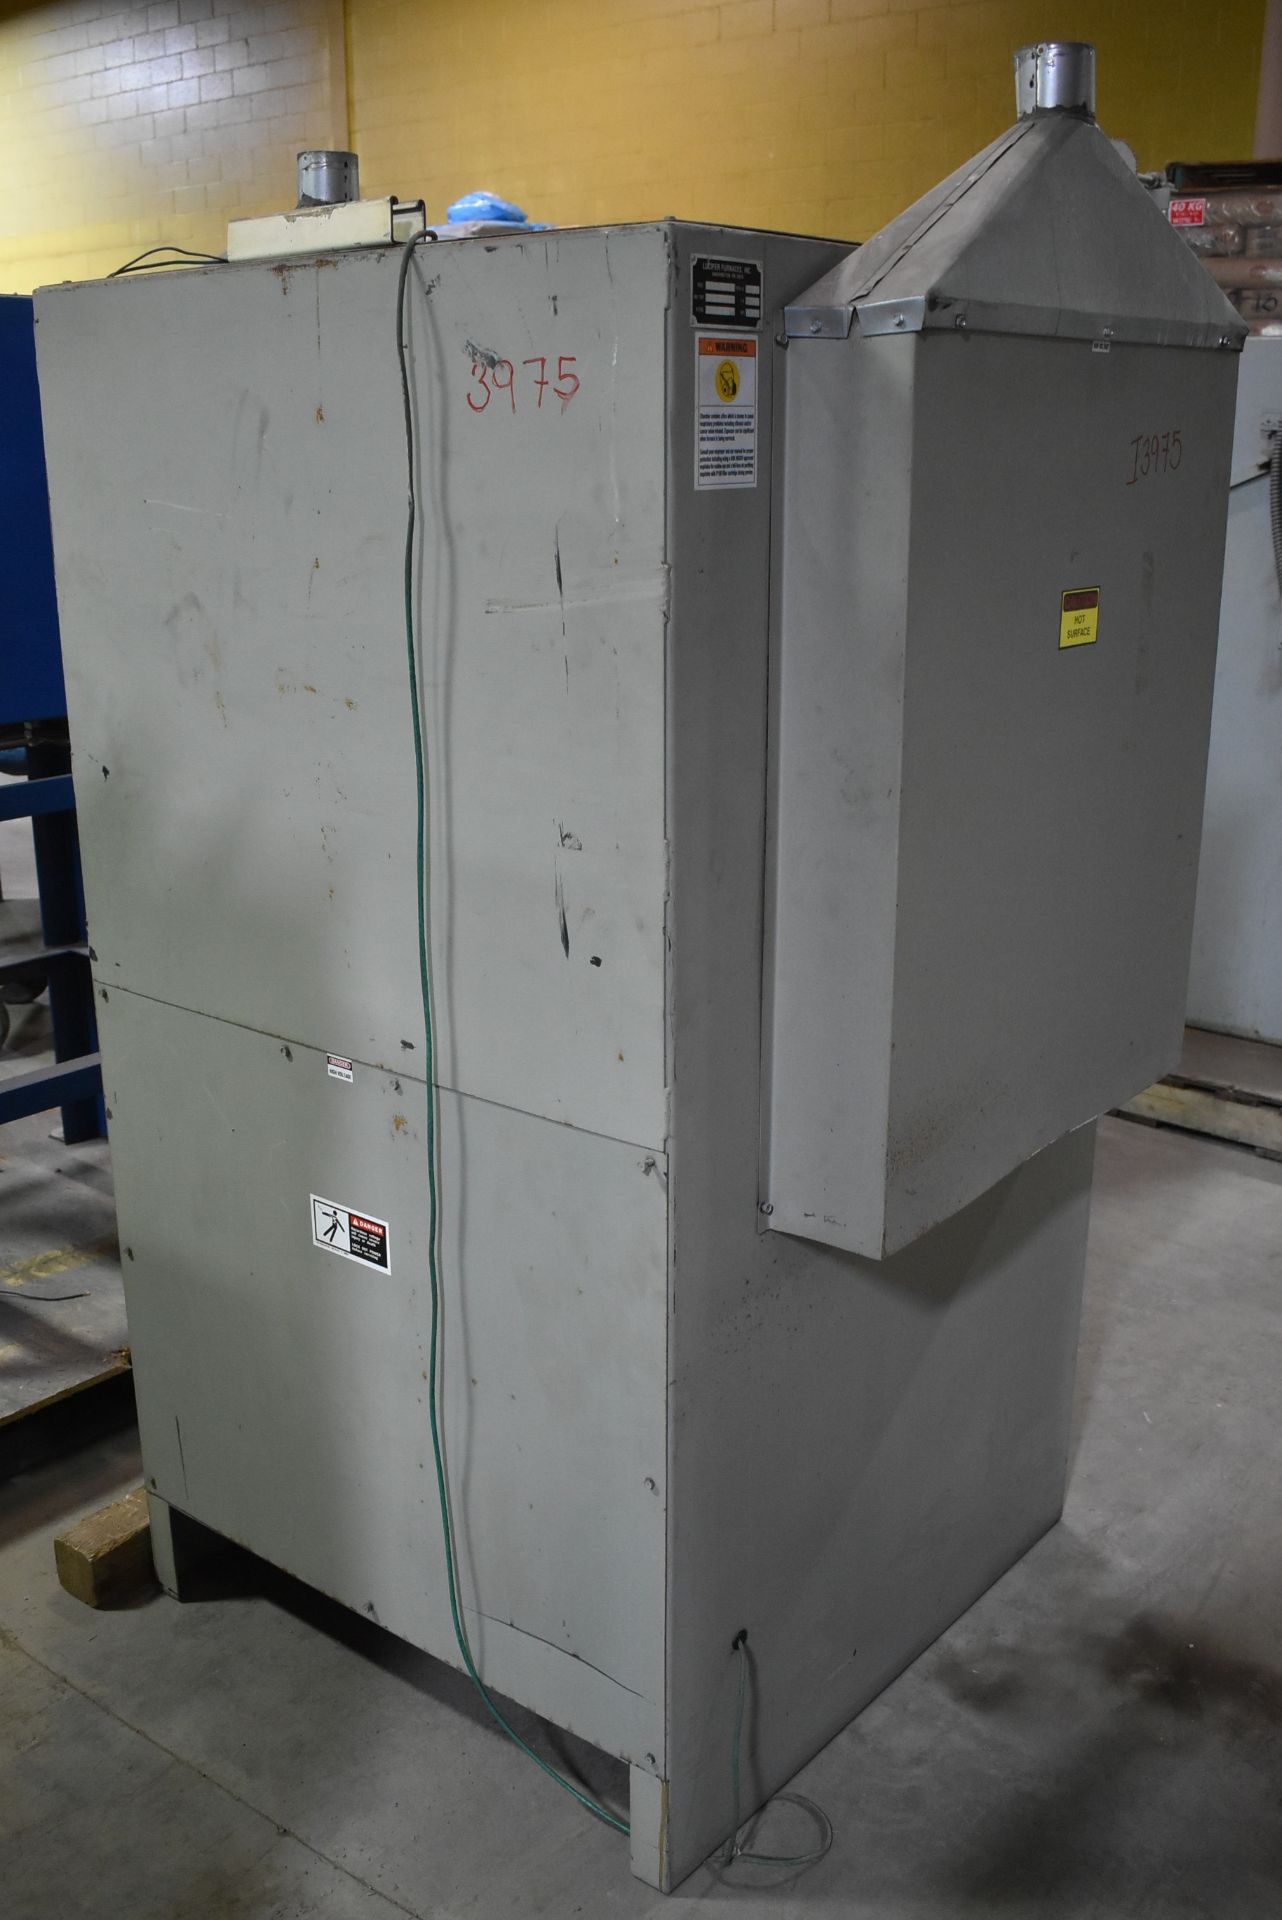 LUCIFER HS3-M24 ELECTRIC BOX FURNACE WITH 2450 DEG. F. MAX. TEMPERATURE, 18.5 KW, 12"X19"X23"D - Image 4 of 5